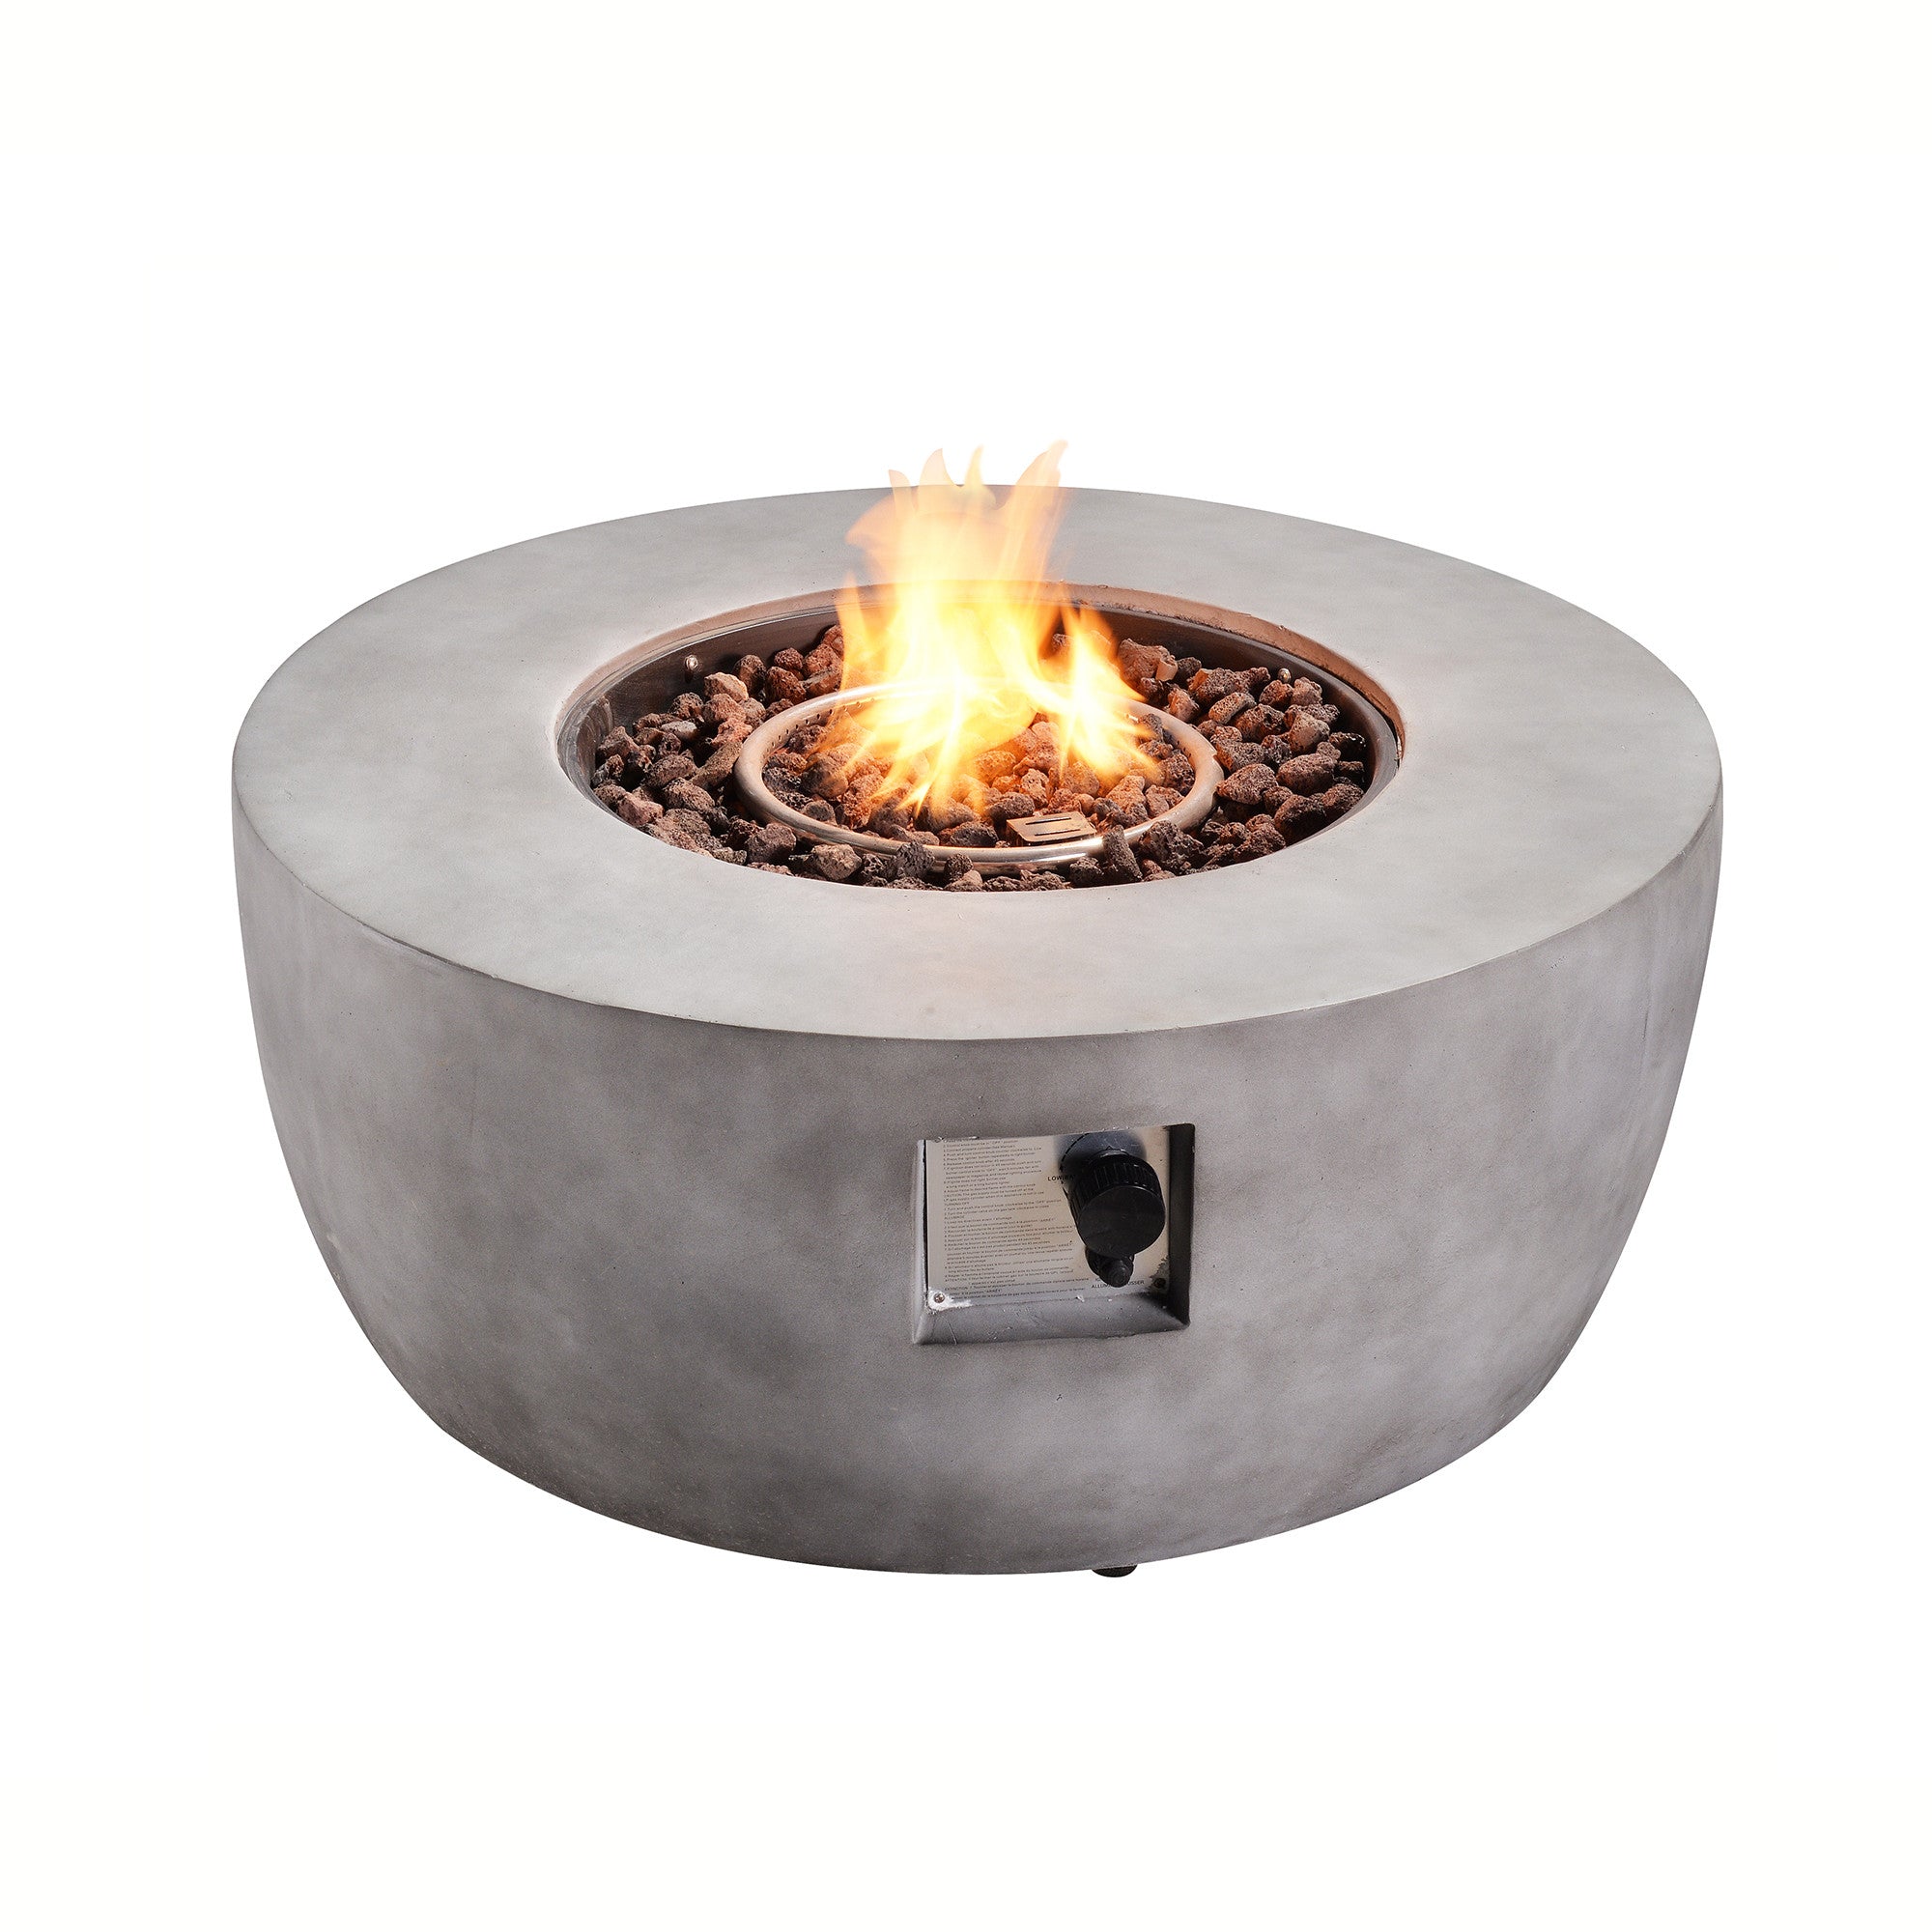 Round propane fire pit. Concrete base 36" for outdoor use. 